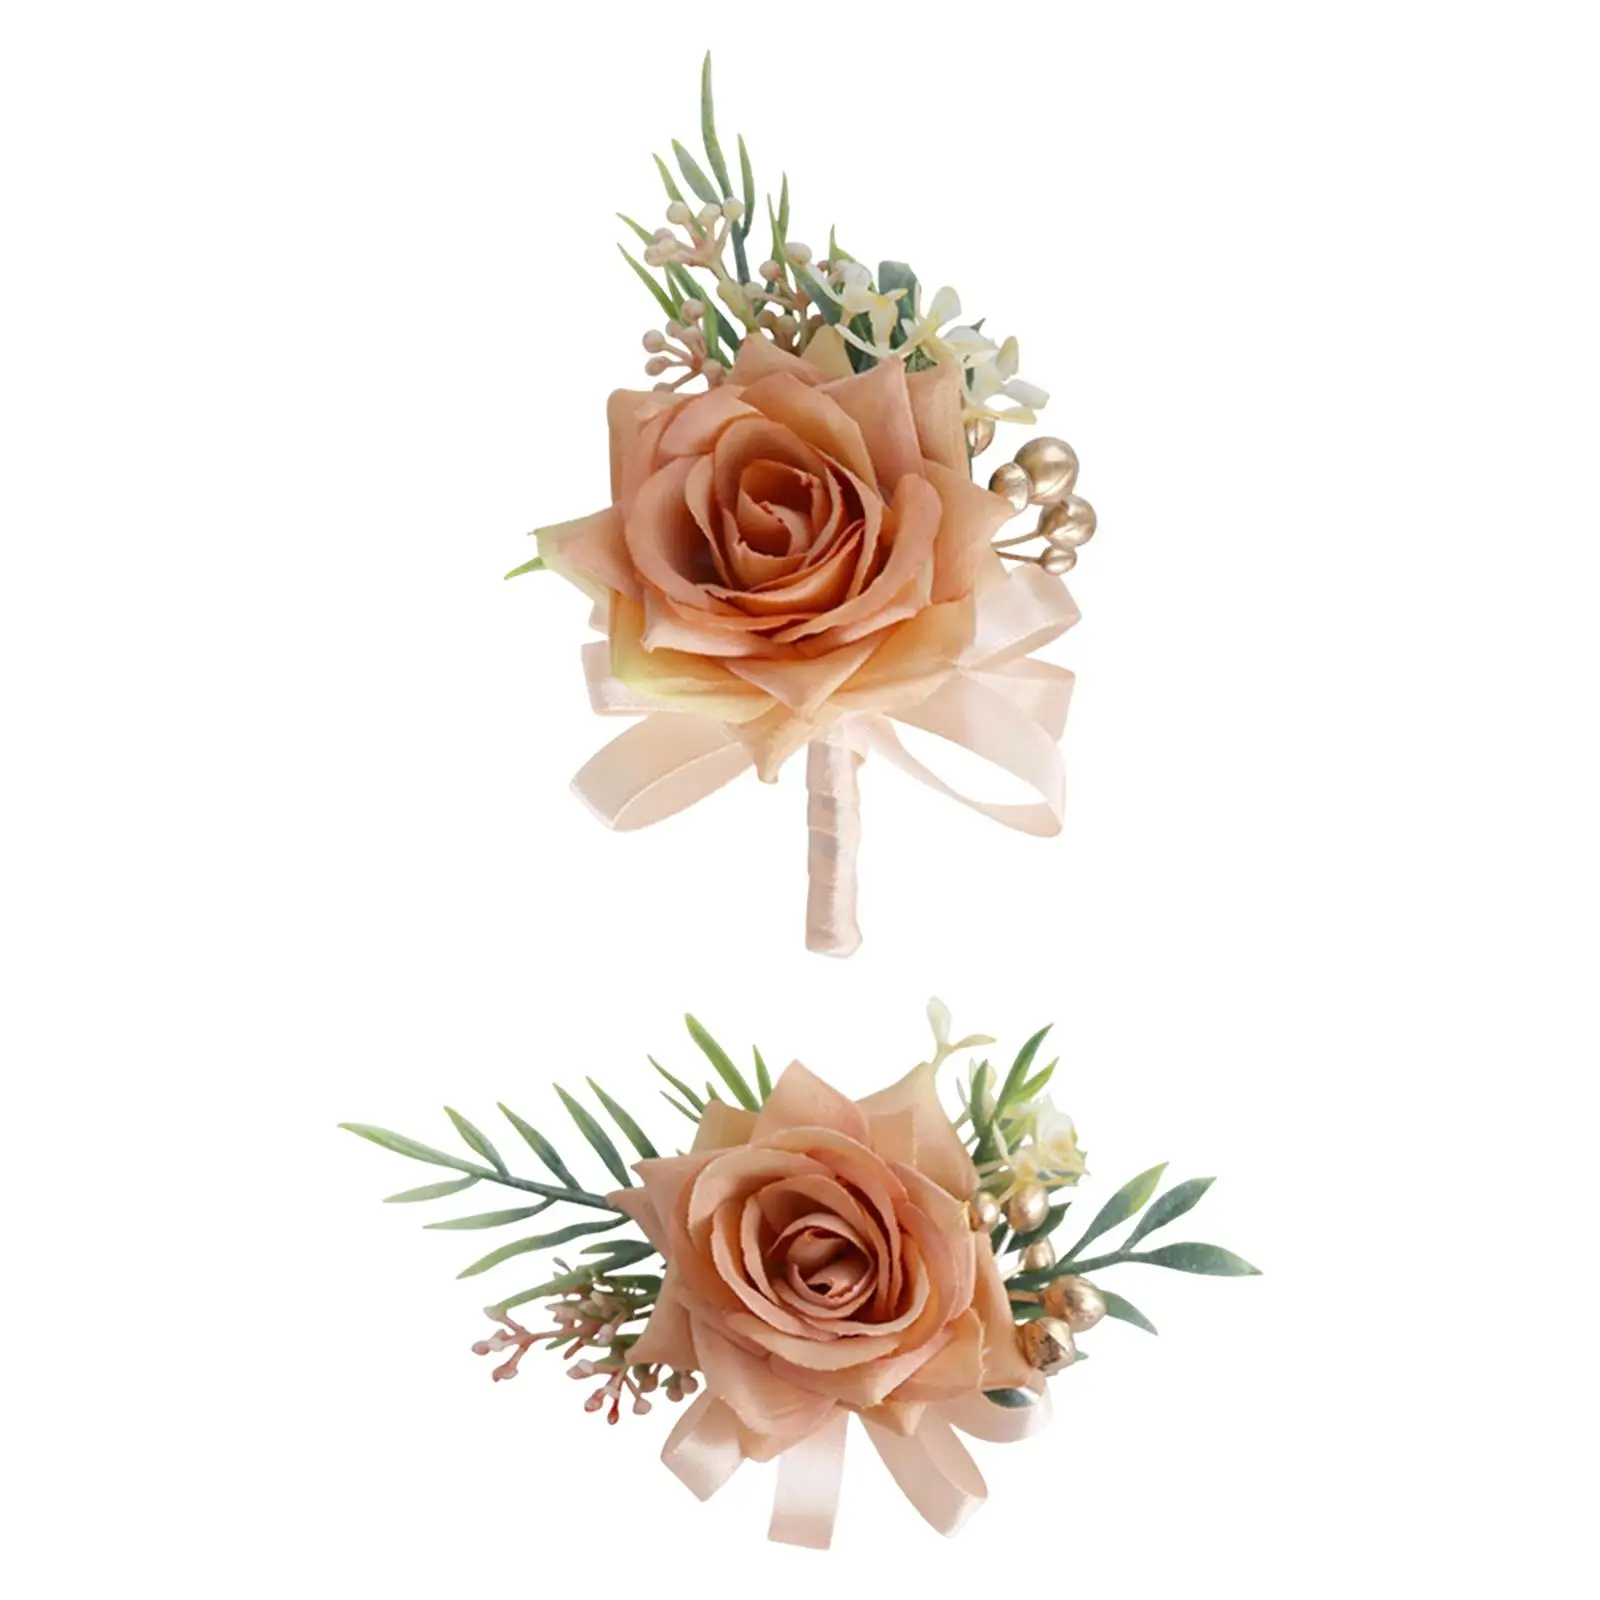 

Wrist Corsage Boutonniere Hand Flower Brooch Pin for Bridesmaid Celebration Party